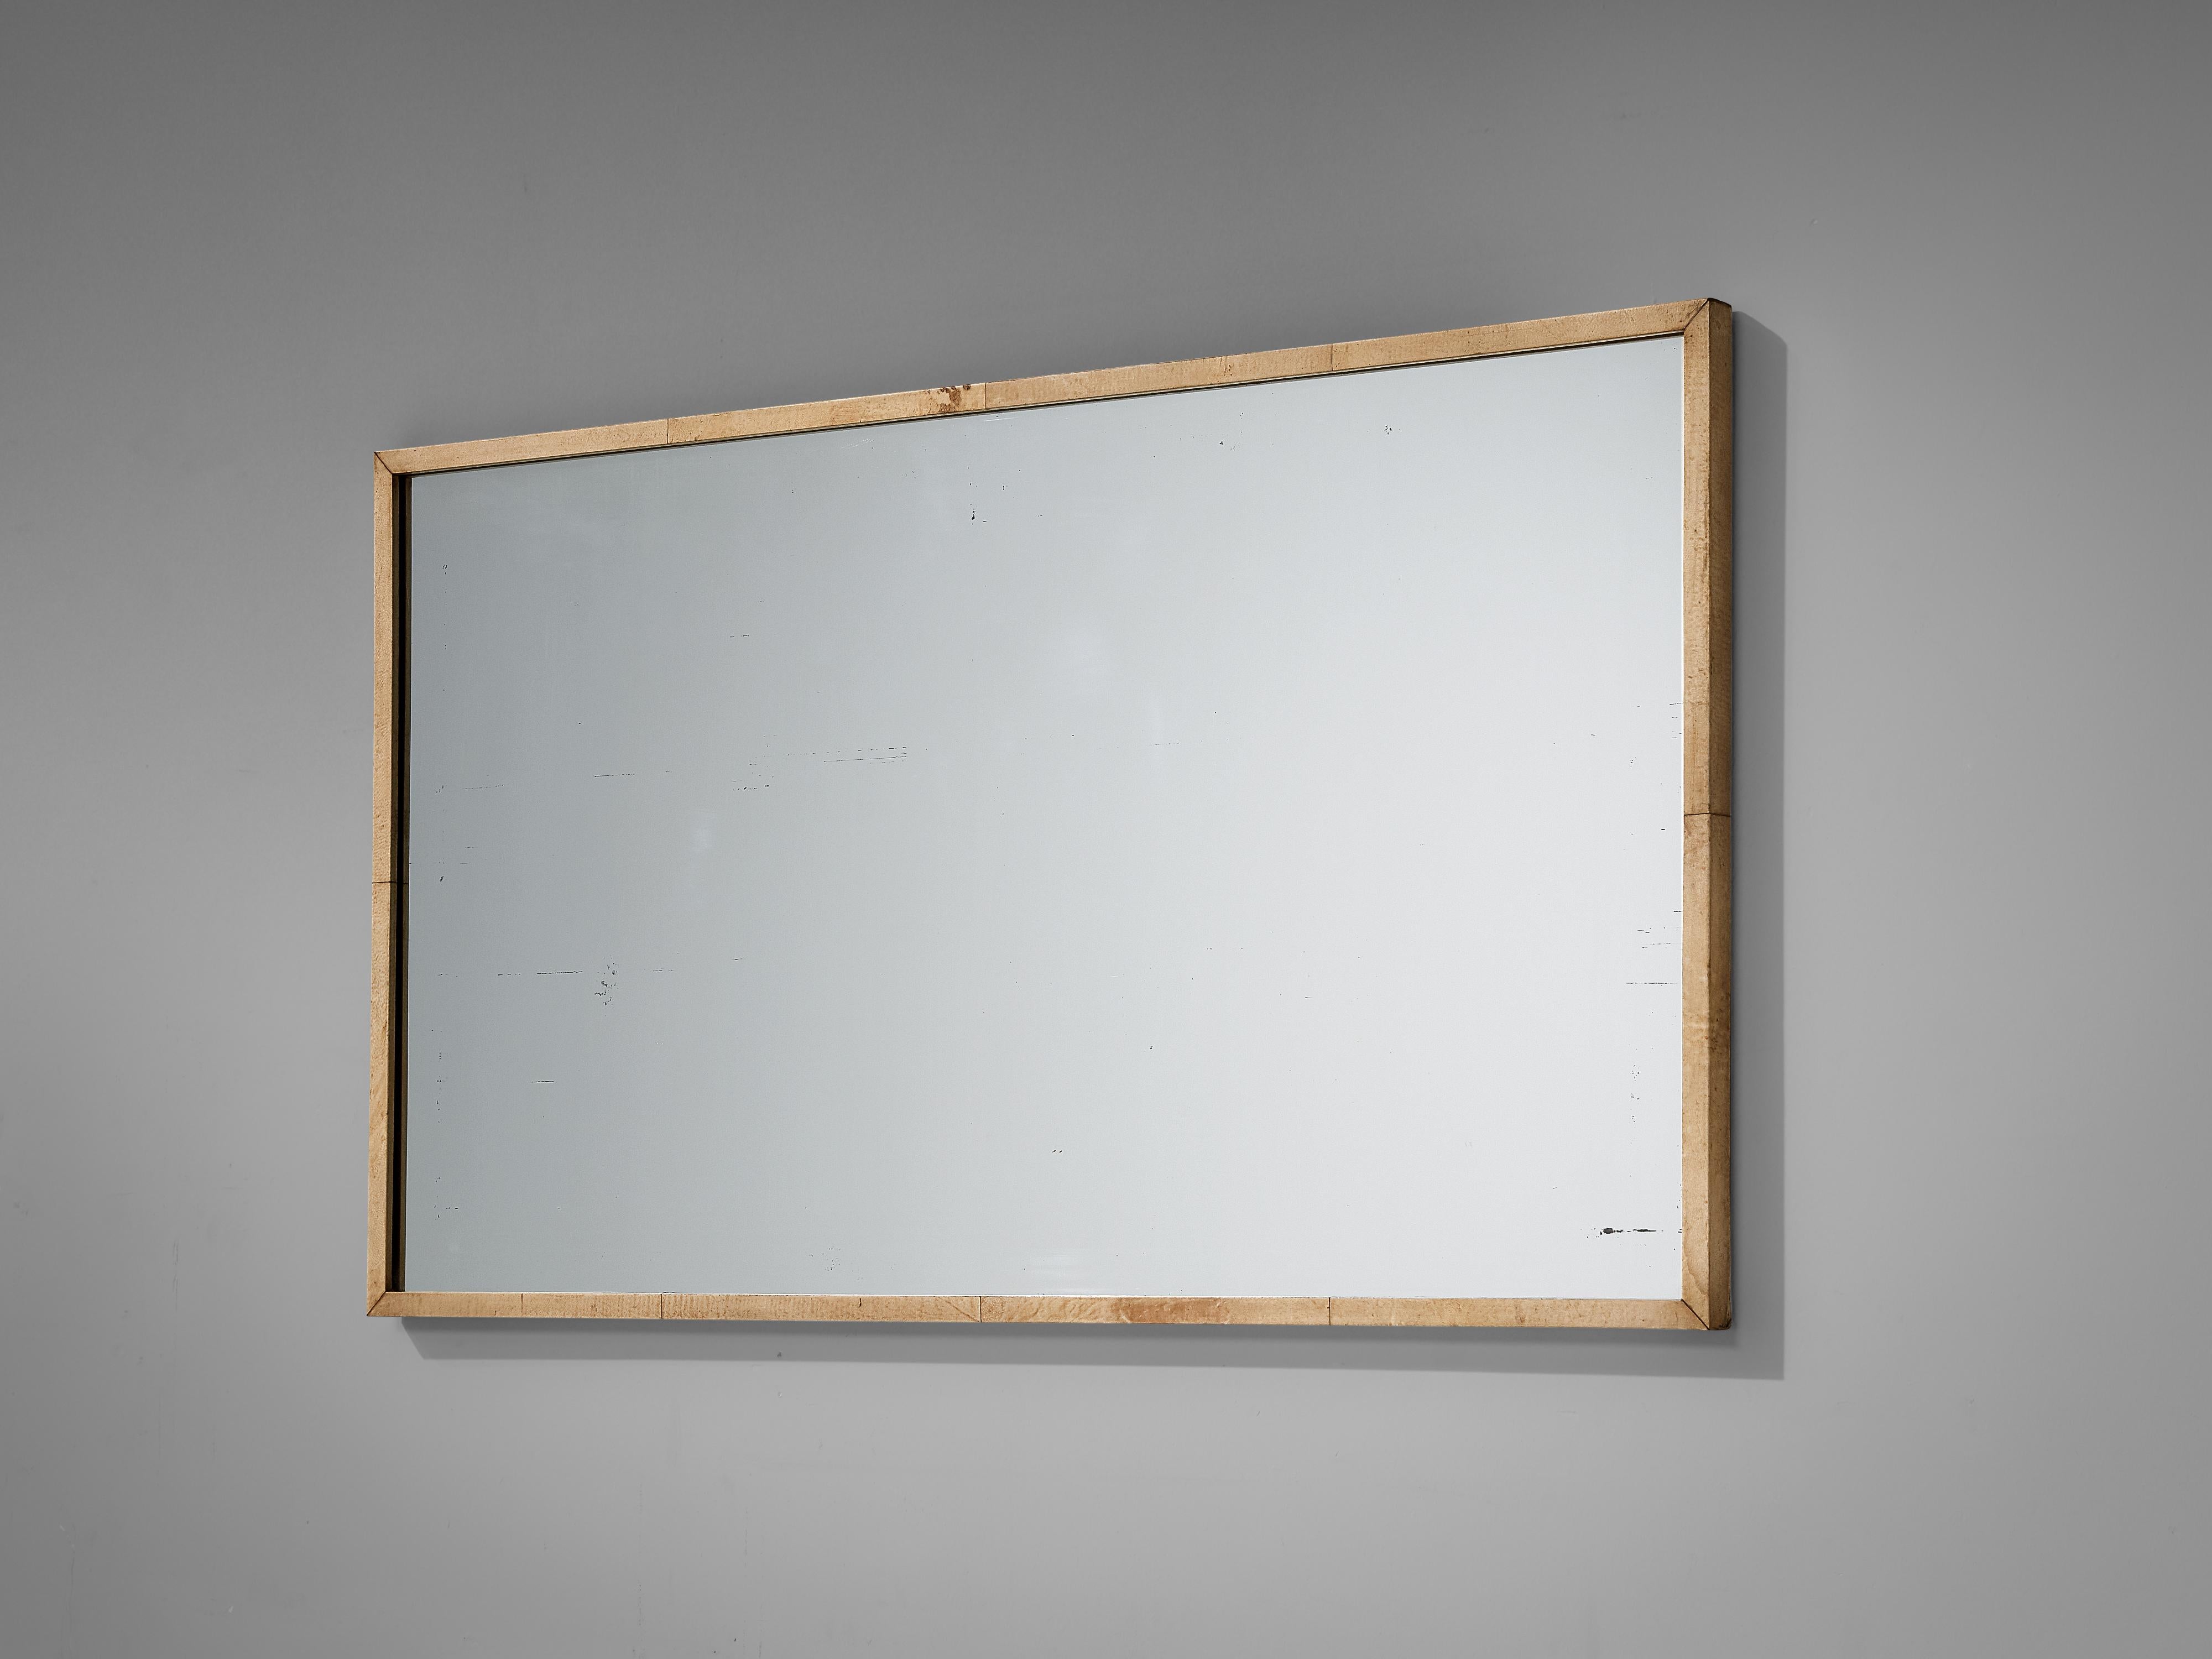 Valzania, mirror, parchment, wood, Italy, 1940s

Rare mirror by Valzania, from the 1940s. This mirror matches with a Valzania sideboard which we have in our collection too. The rectangular frame of this mirror is fully covered in a light parchment